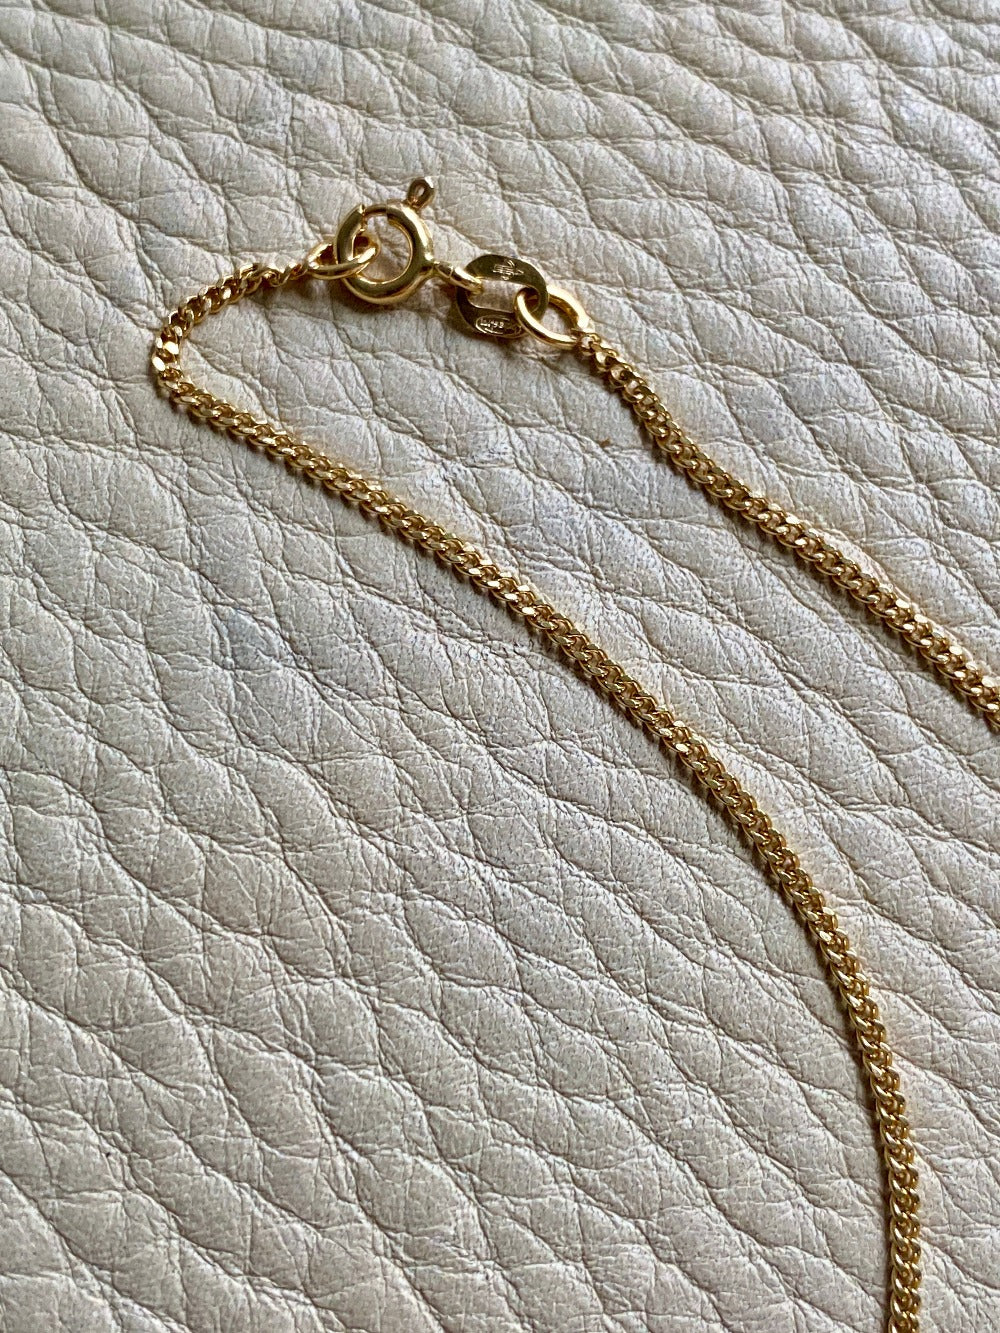 Italian vintage 18k gold curb link necklace by Balestra - 21 inch length